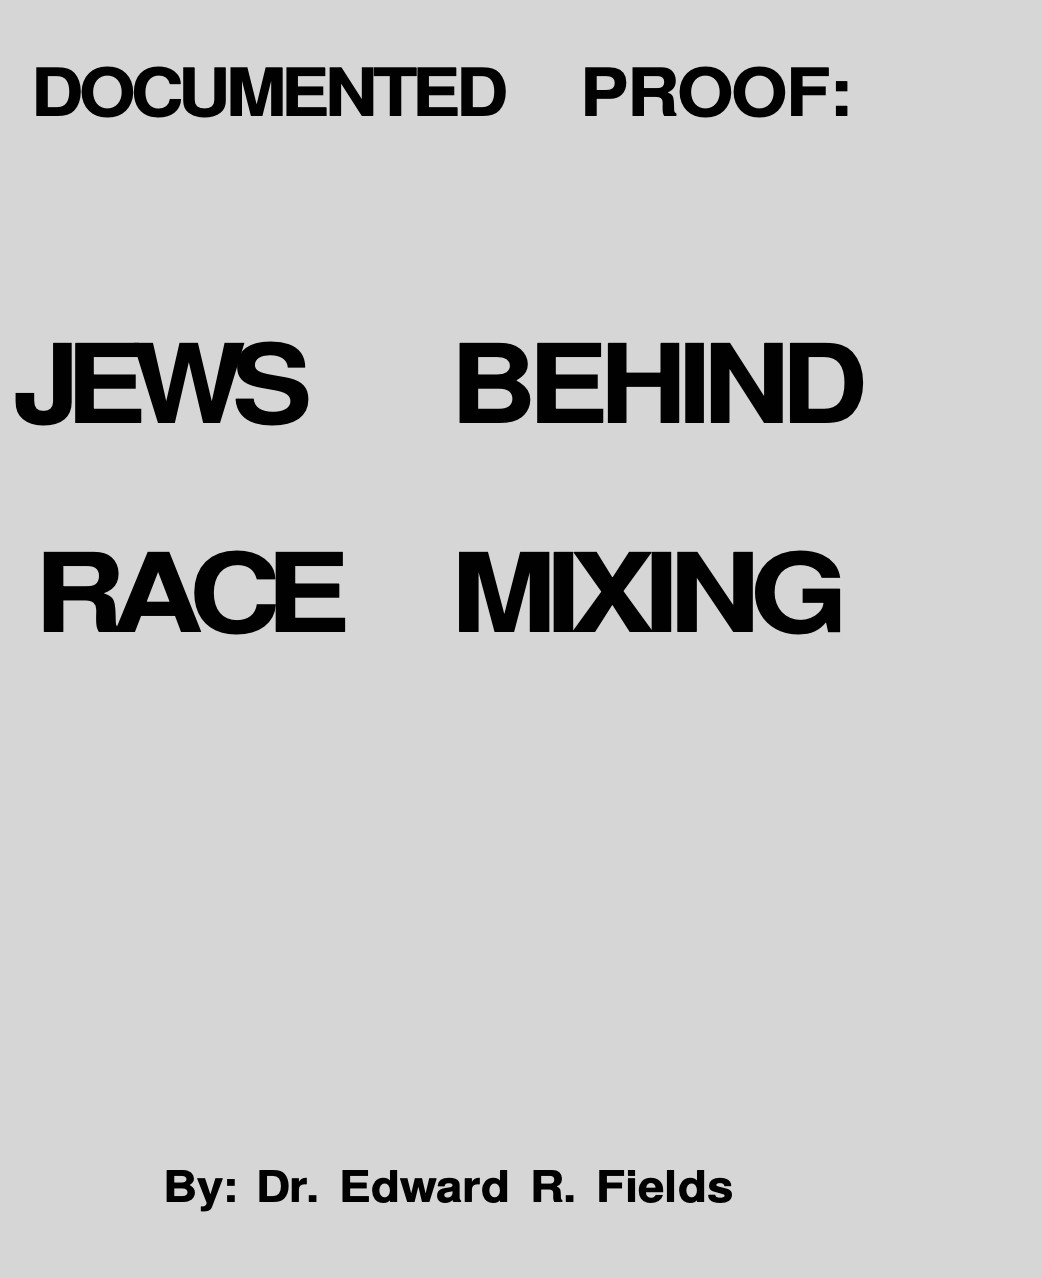 Documented Proof: Jews Behind Race Mixing (1970) by Edward R. Fields